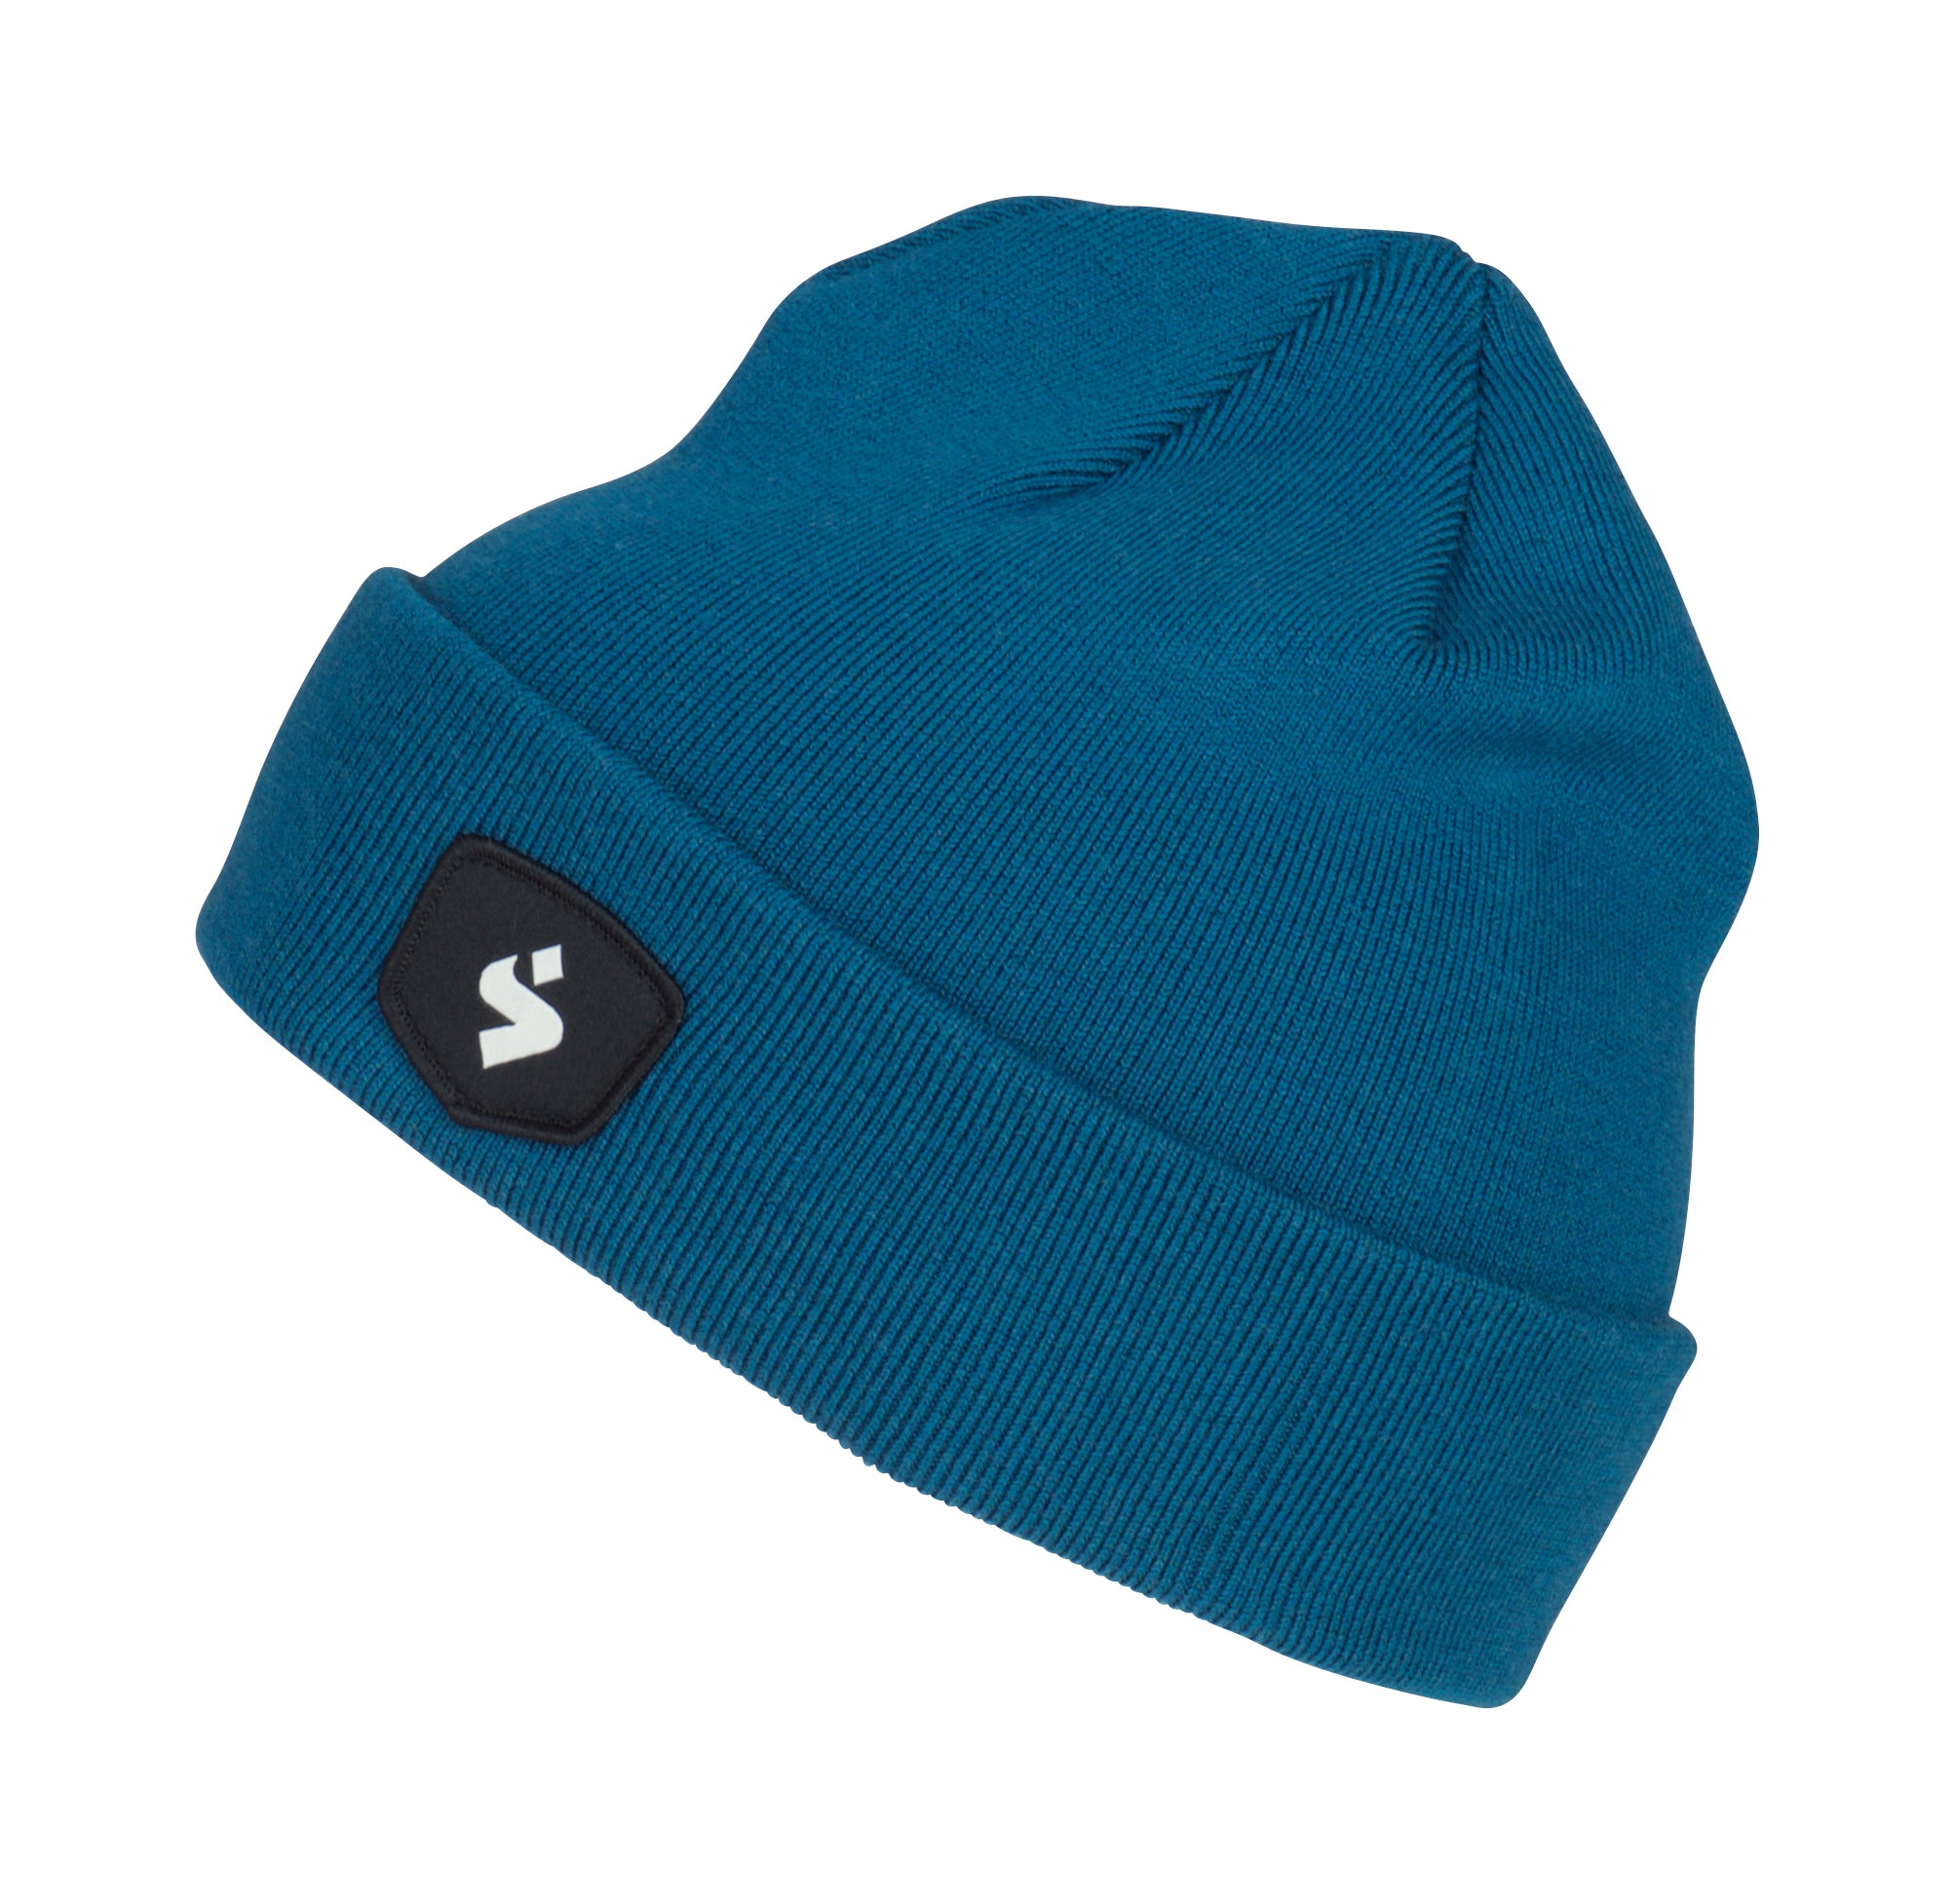 Partisan Wool Beanie 【archives】